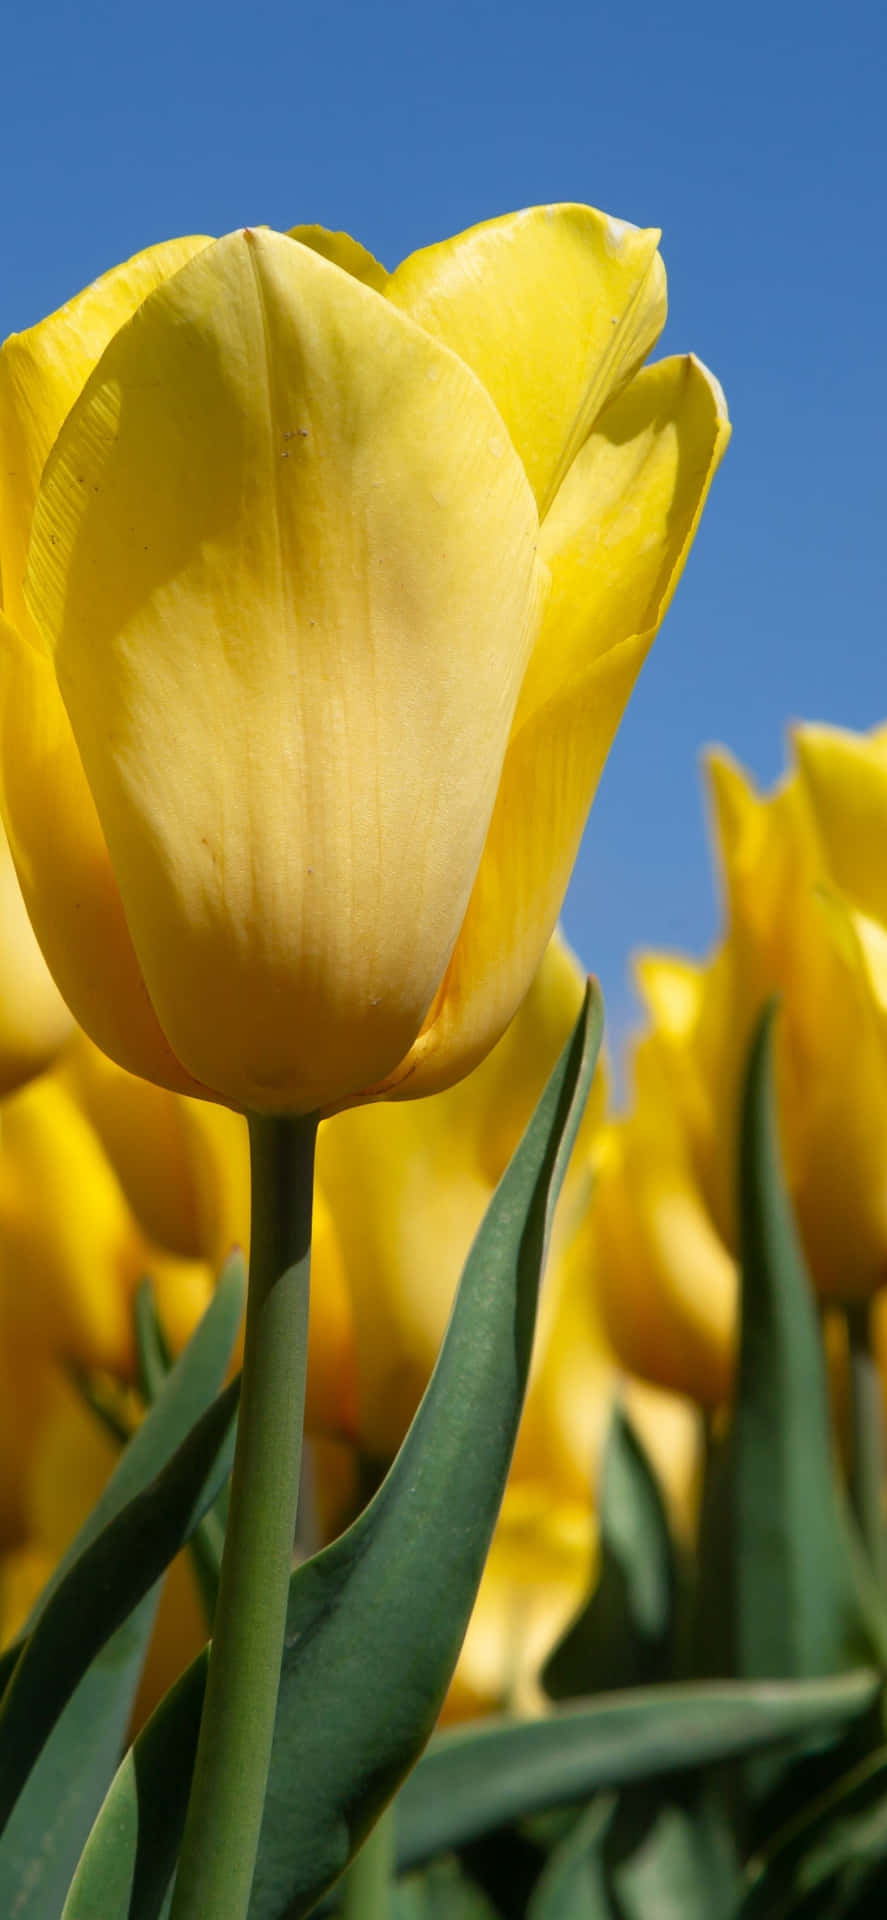 Captivating Yellow Tulips in Full Bloom Wallpaper